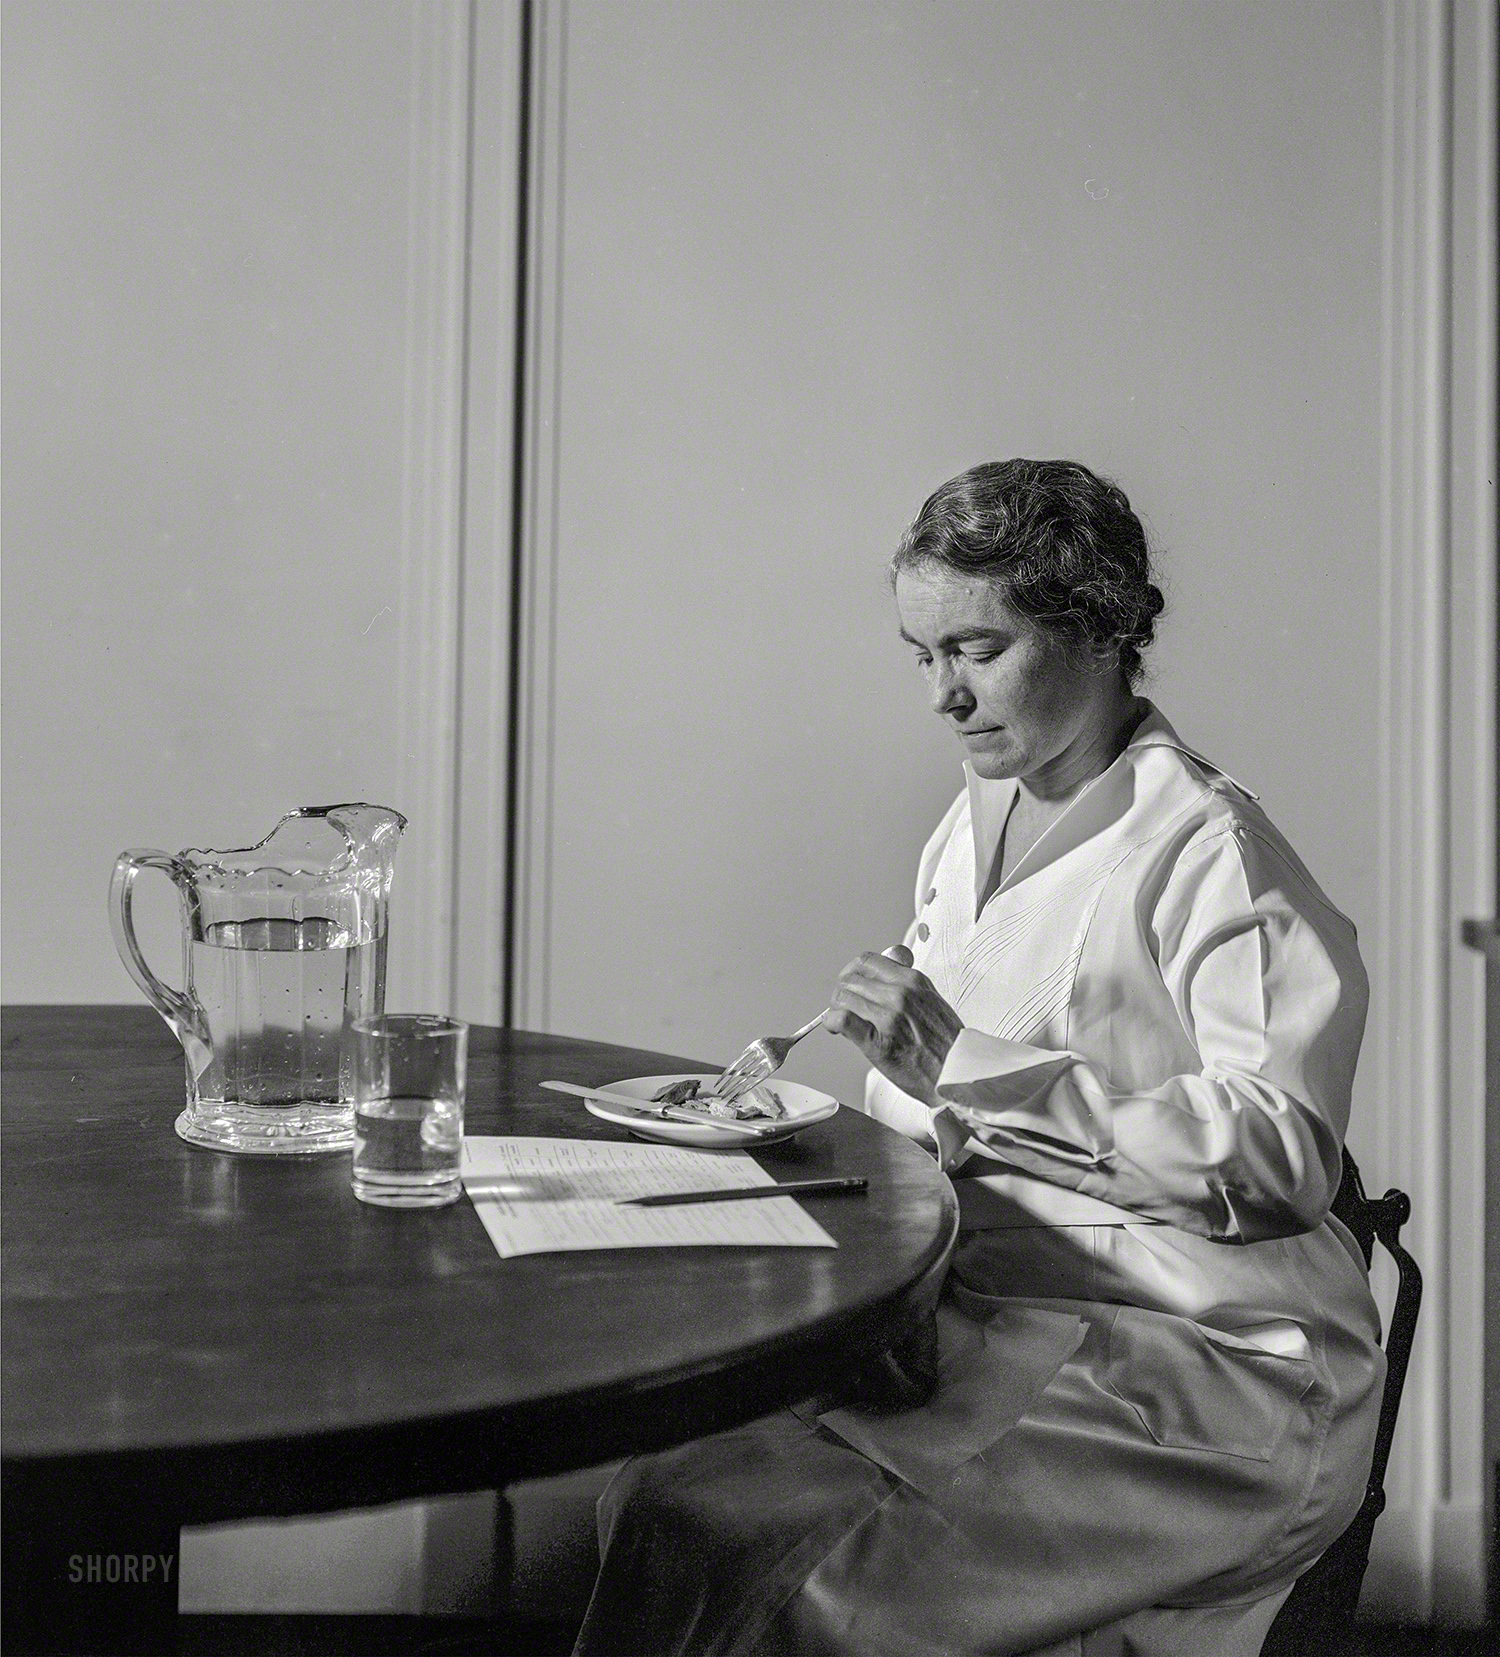 Washington, D.C., circa 1935. "Miss Lucy Alexander, food tester, Department of Agriculture." Something of a Shorpy celebrity, last seen here and here. 8x10 inch acetate negative by Theodor Horydczak. View full size.